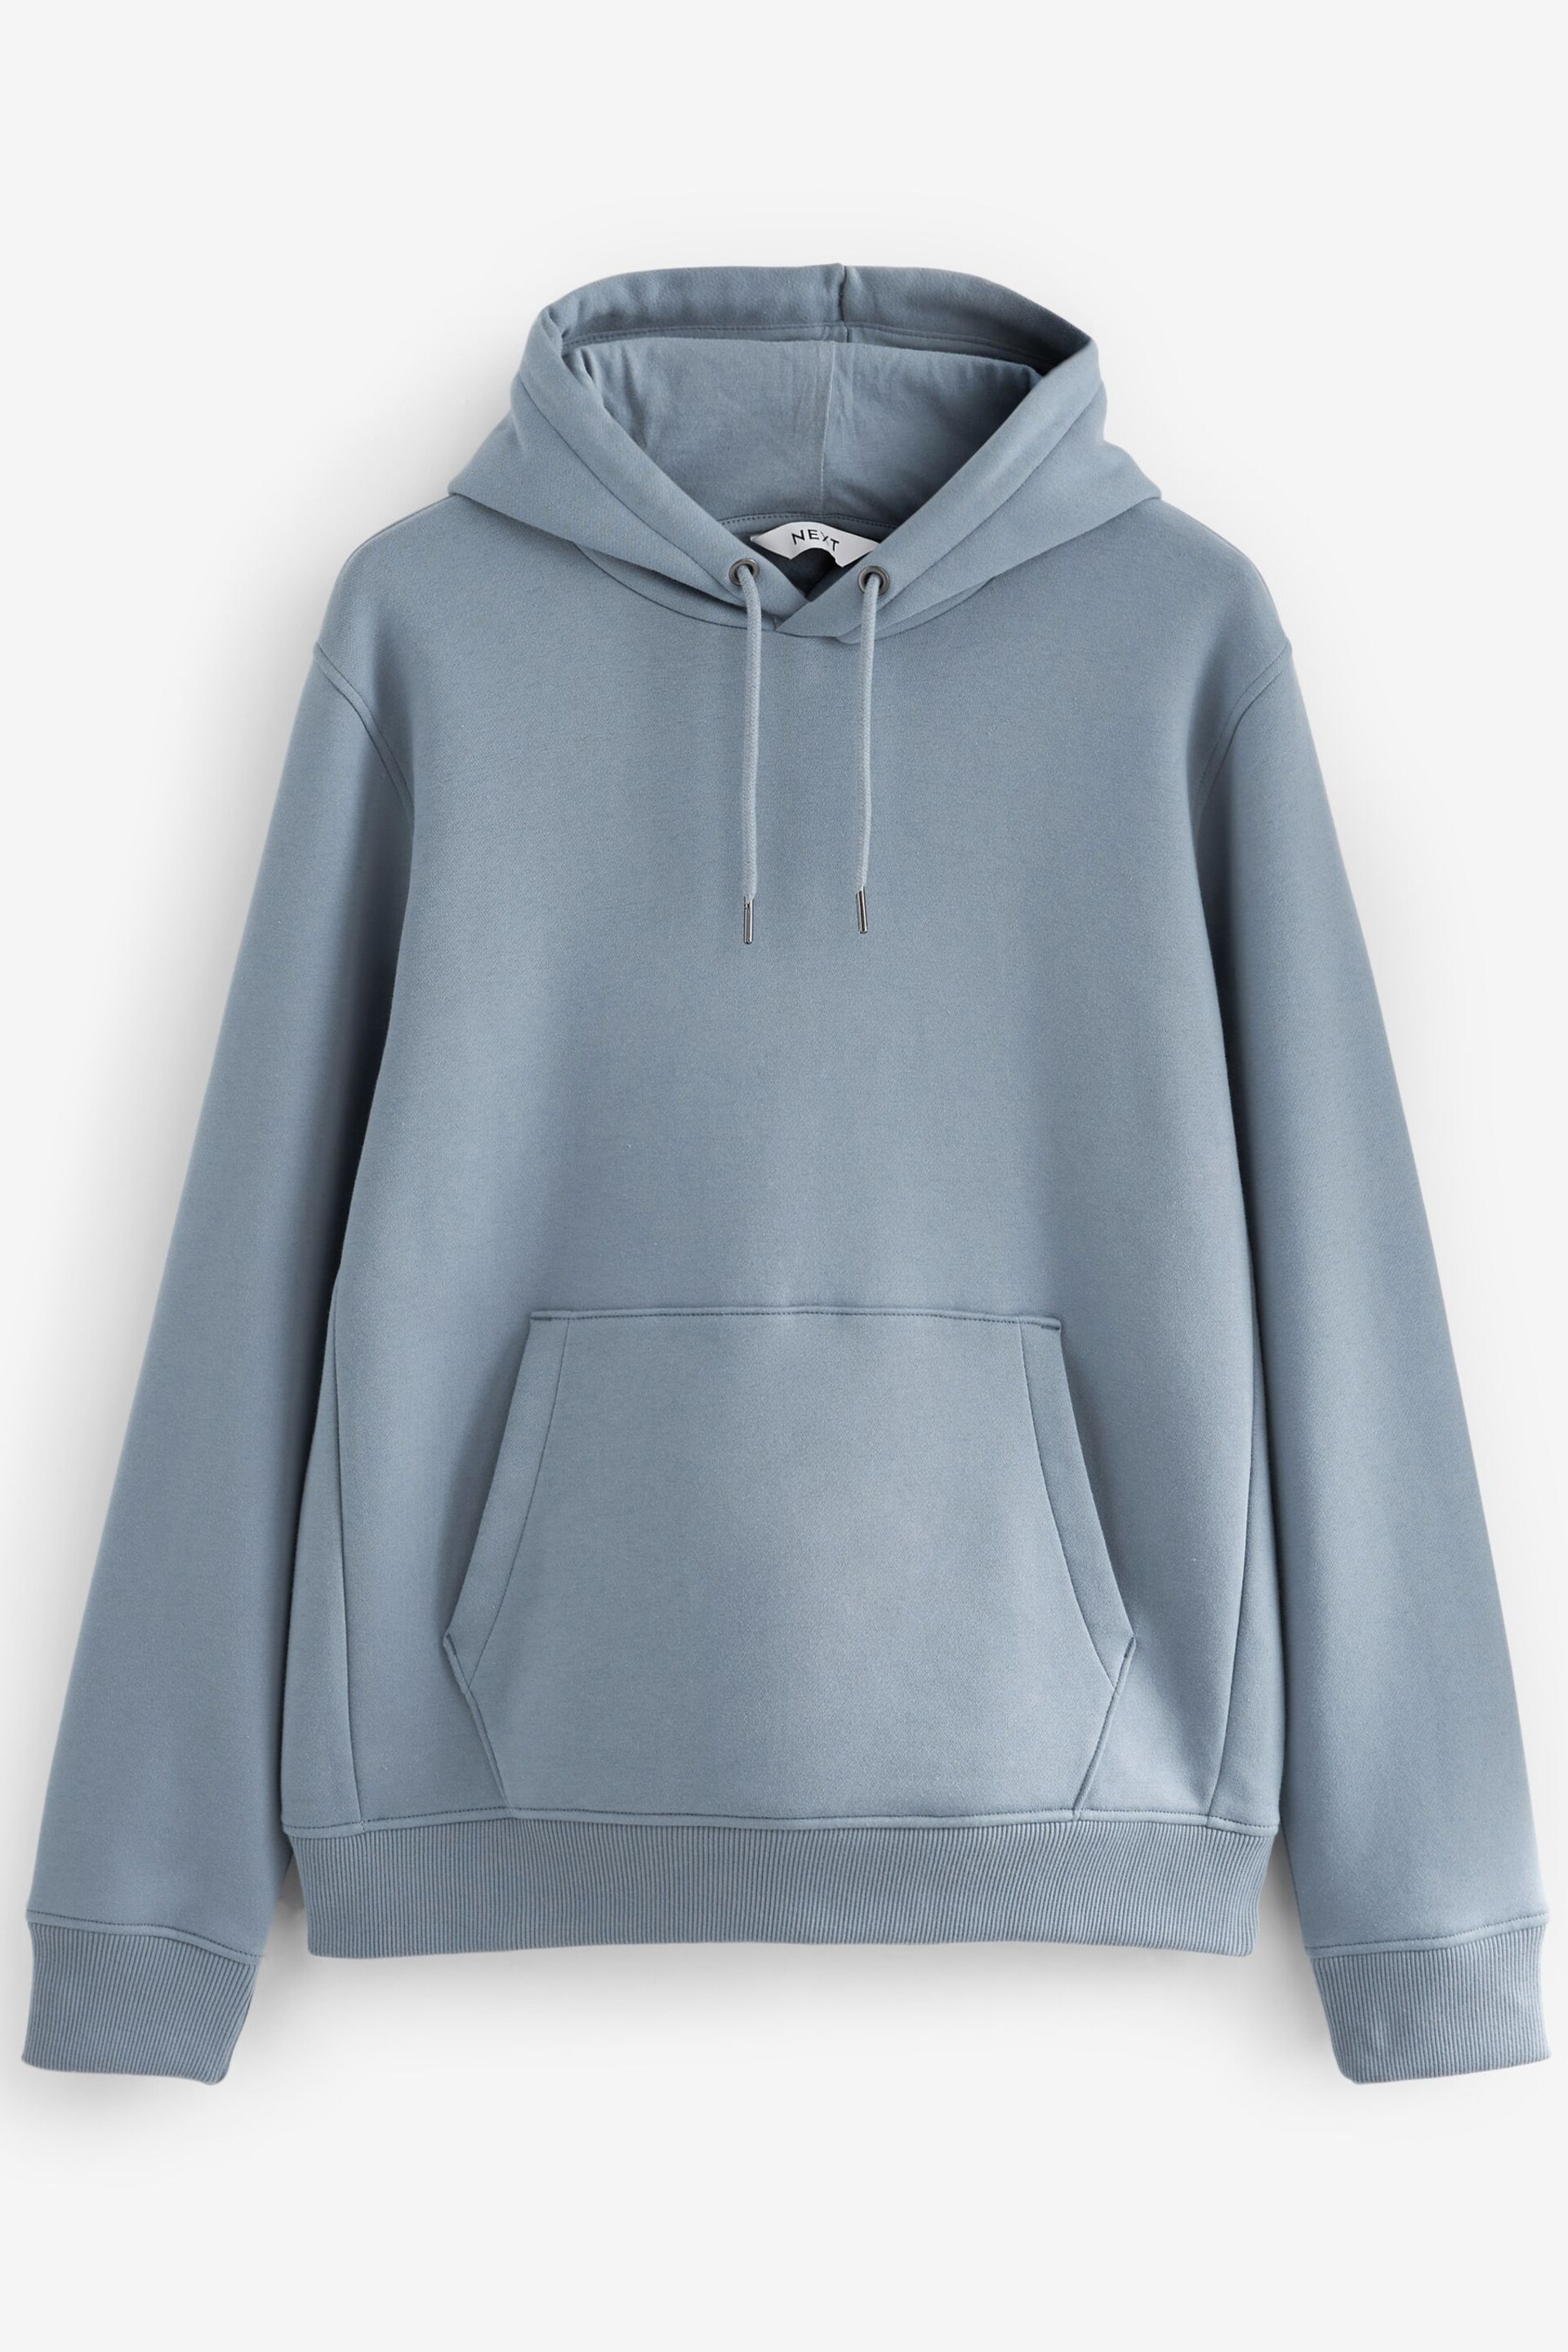 Blue Regular Fit Jersey Cotton Rich Overhead Hoodie - Image 6 of 8